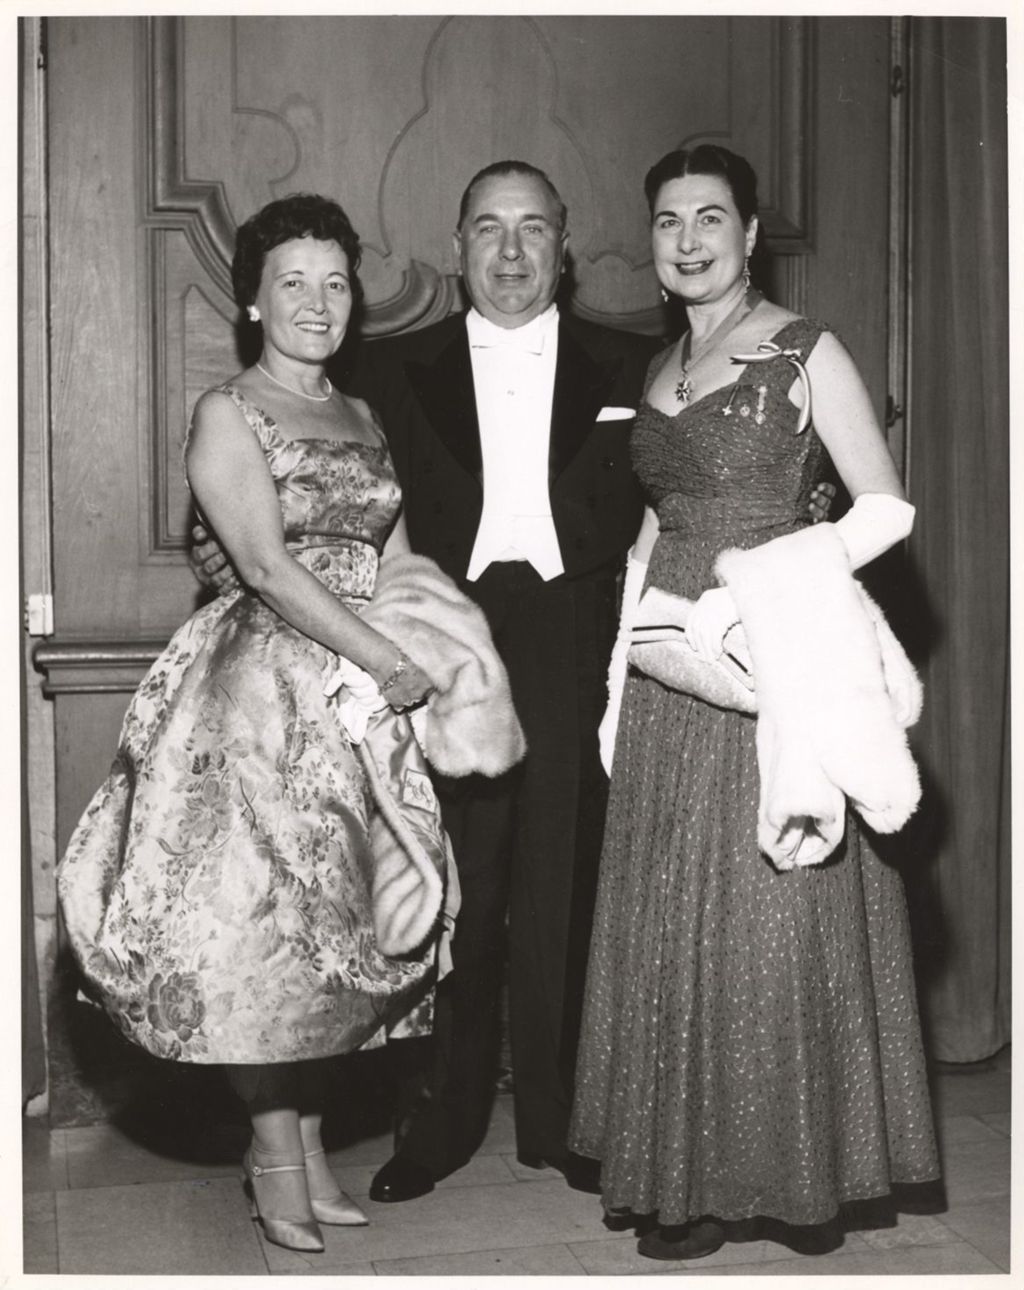 Eleanor and Richard J. Daley with Mrs. Howard R. Peterson at Consular Ball